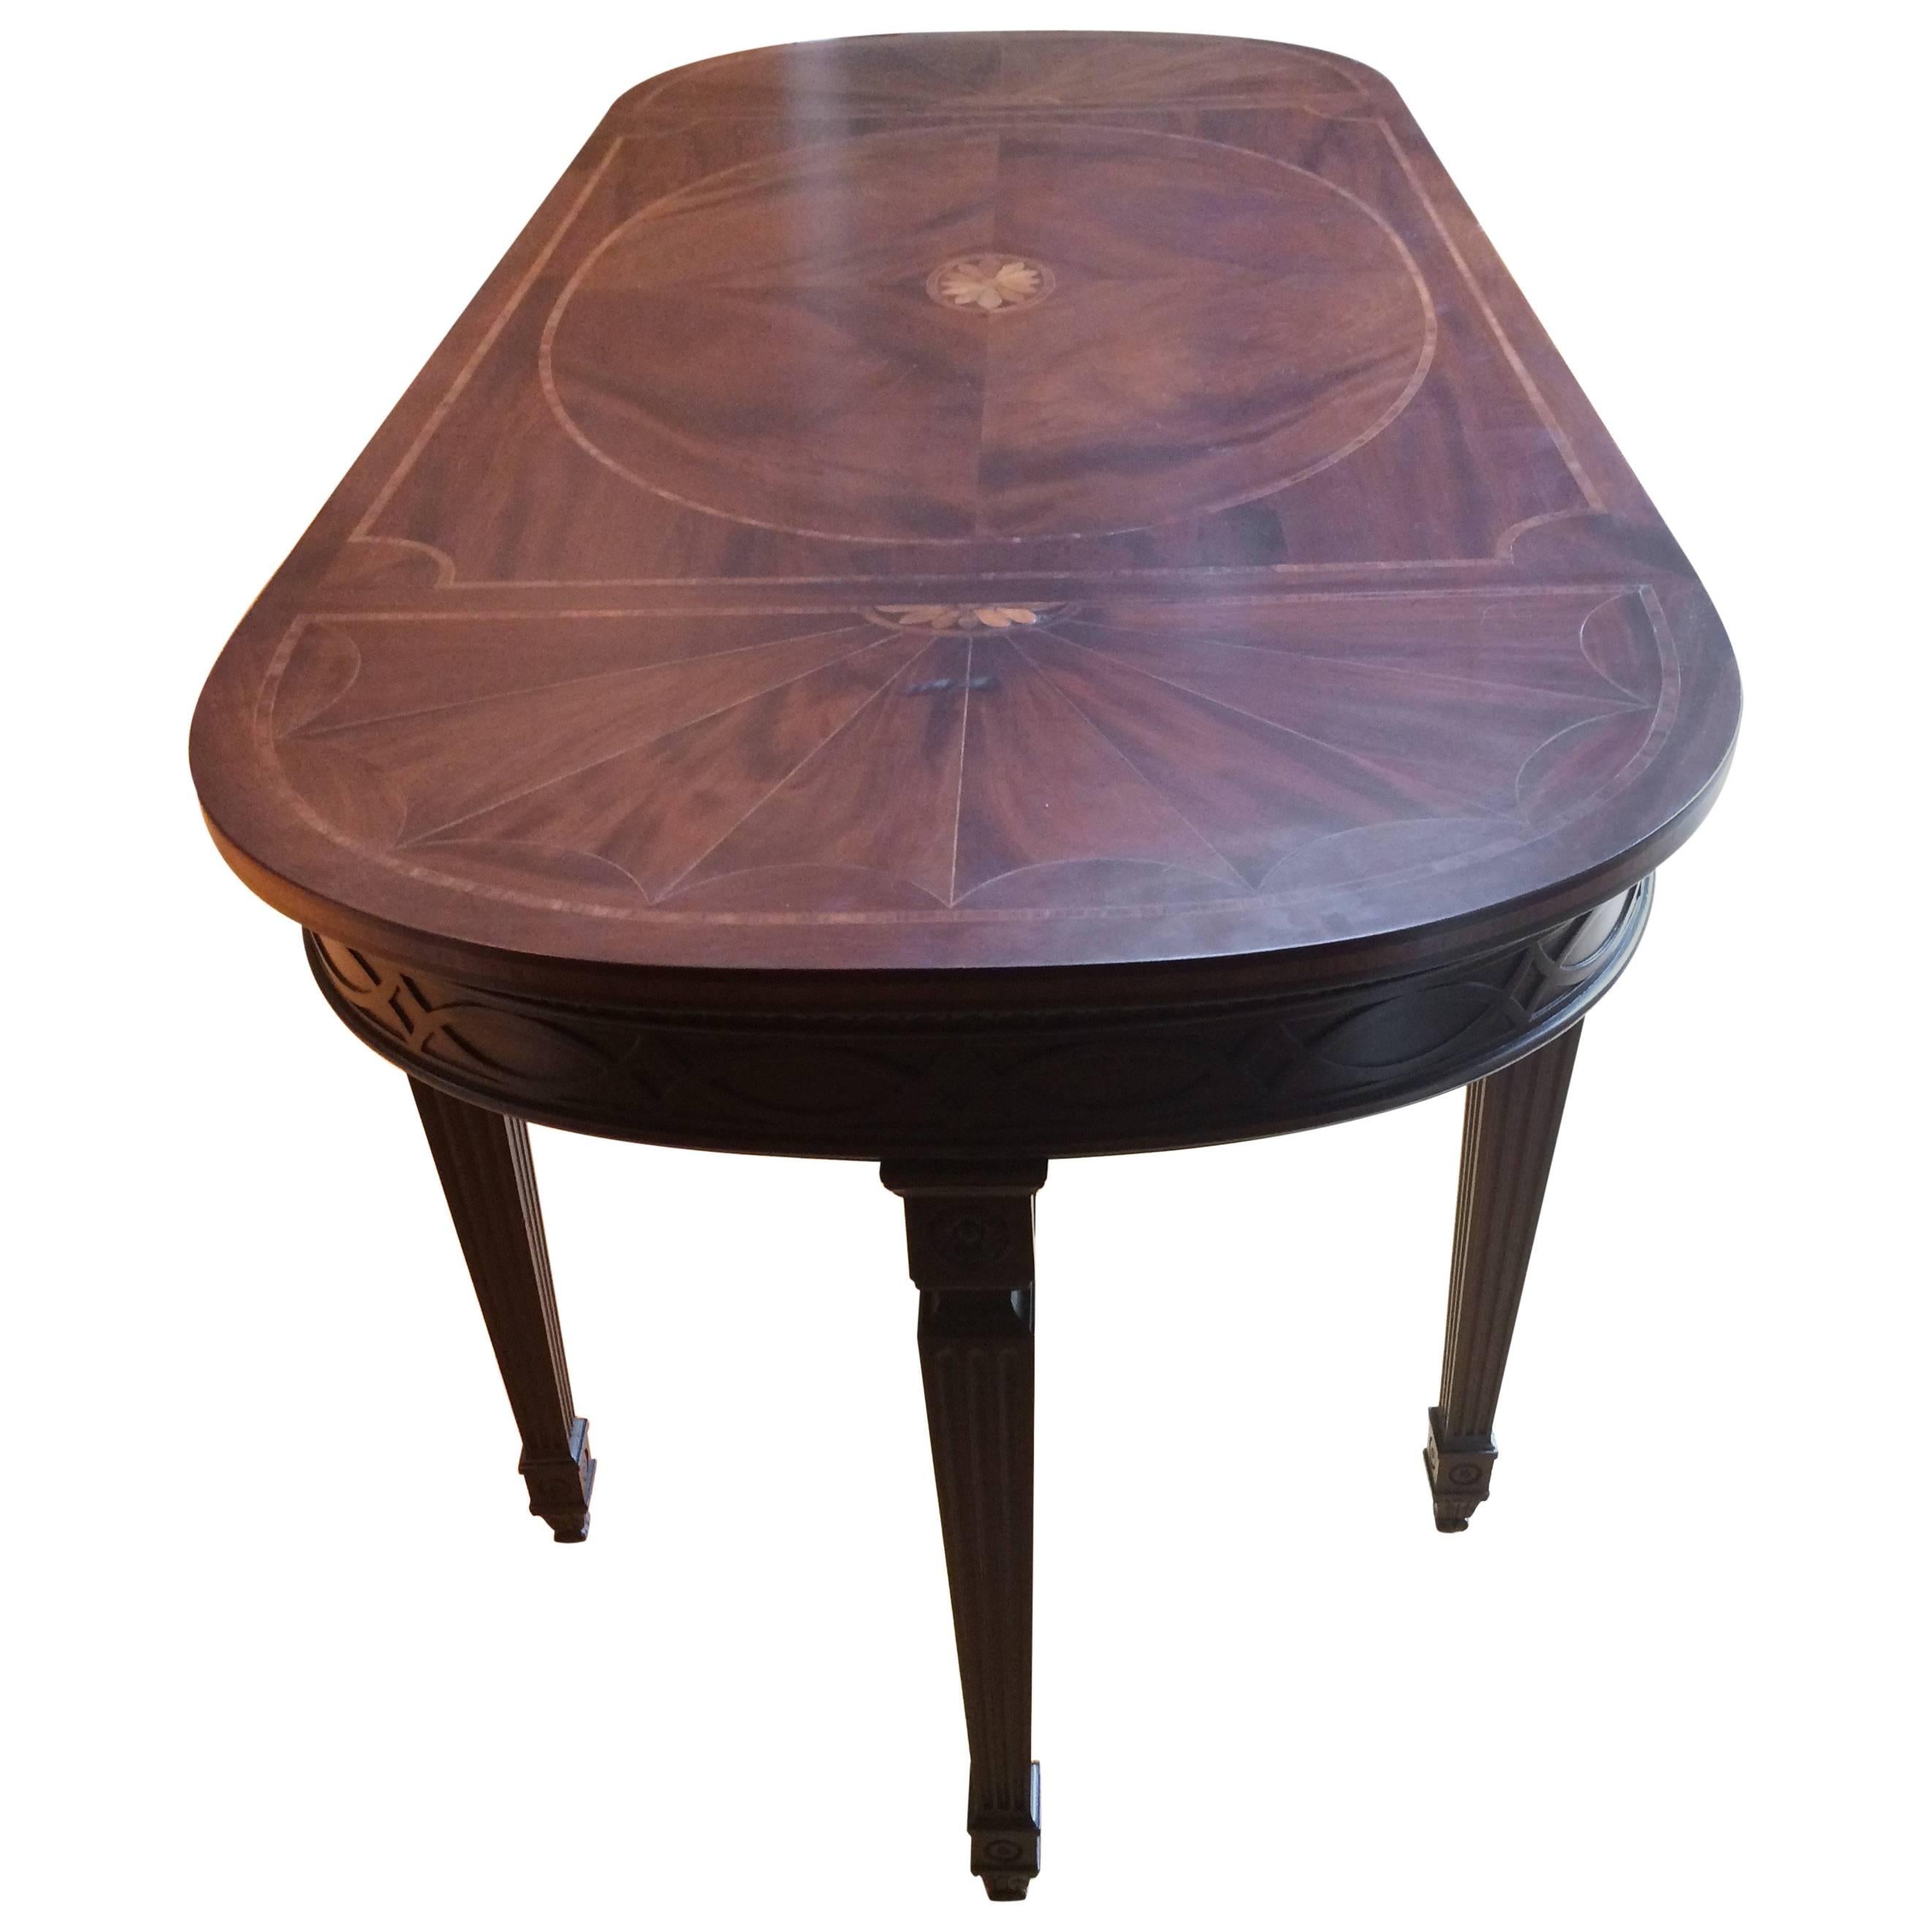 Versatile Regency Style Oblong Inlaid Mixed Wood Table